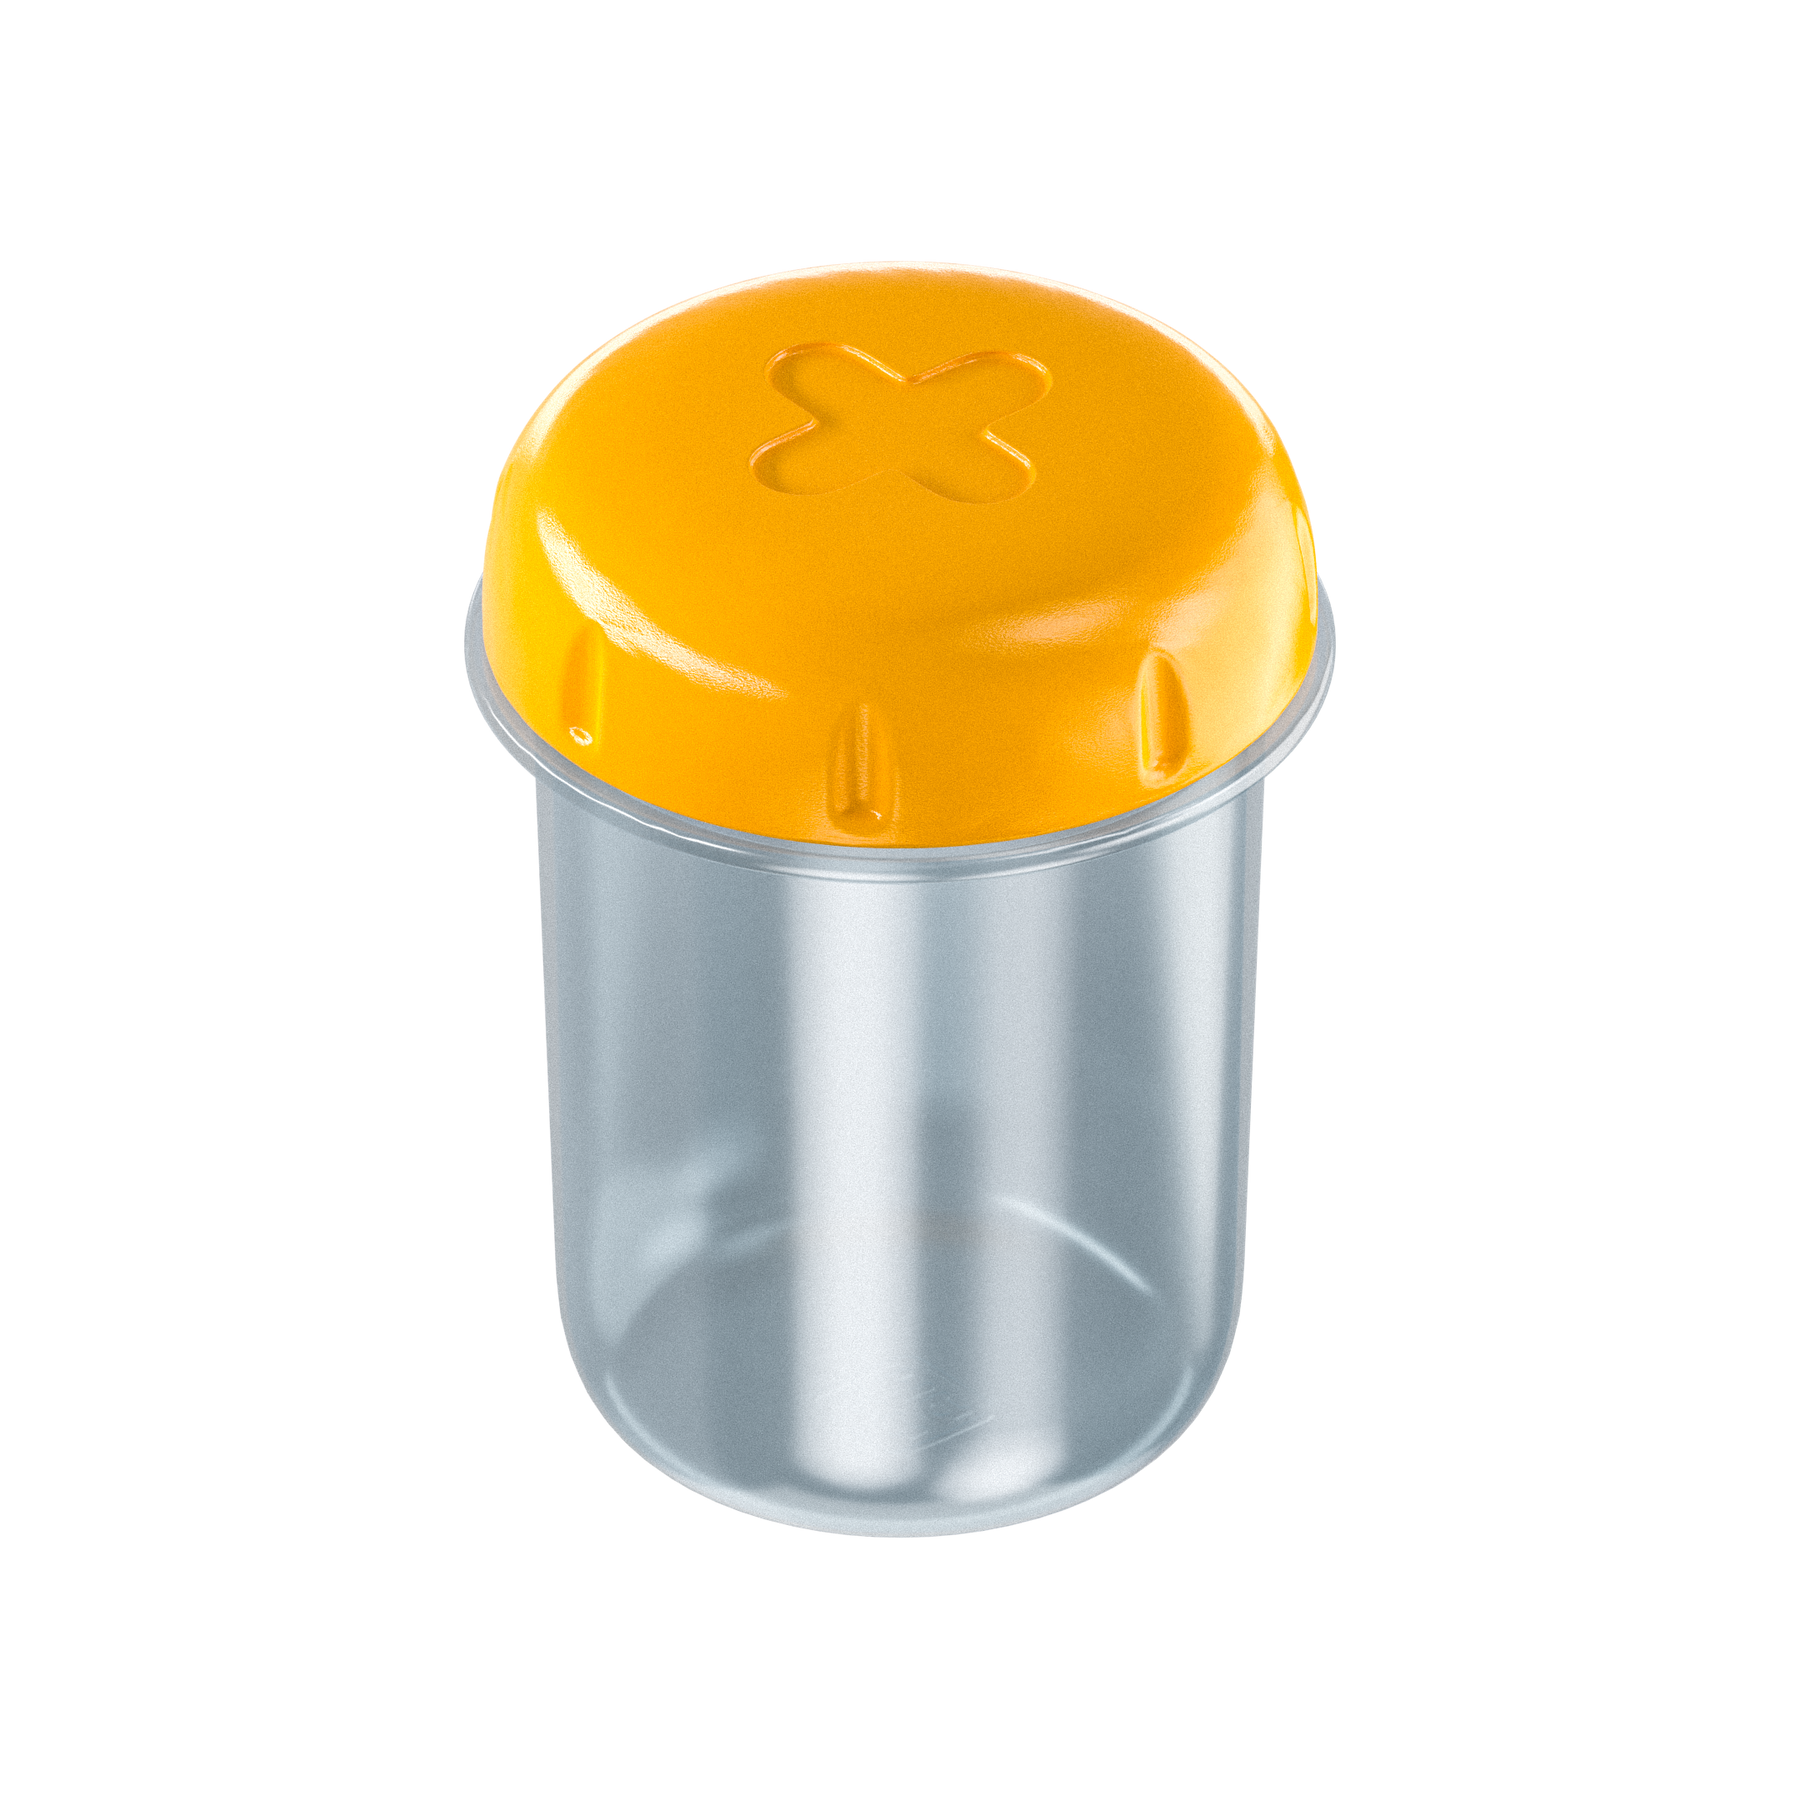 Jar Store Tin Container - Jar Store